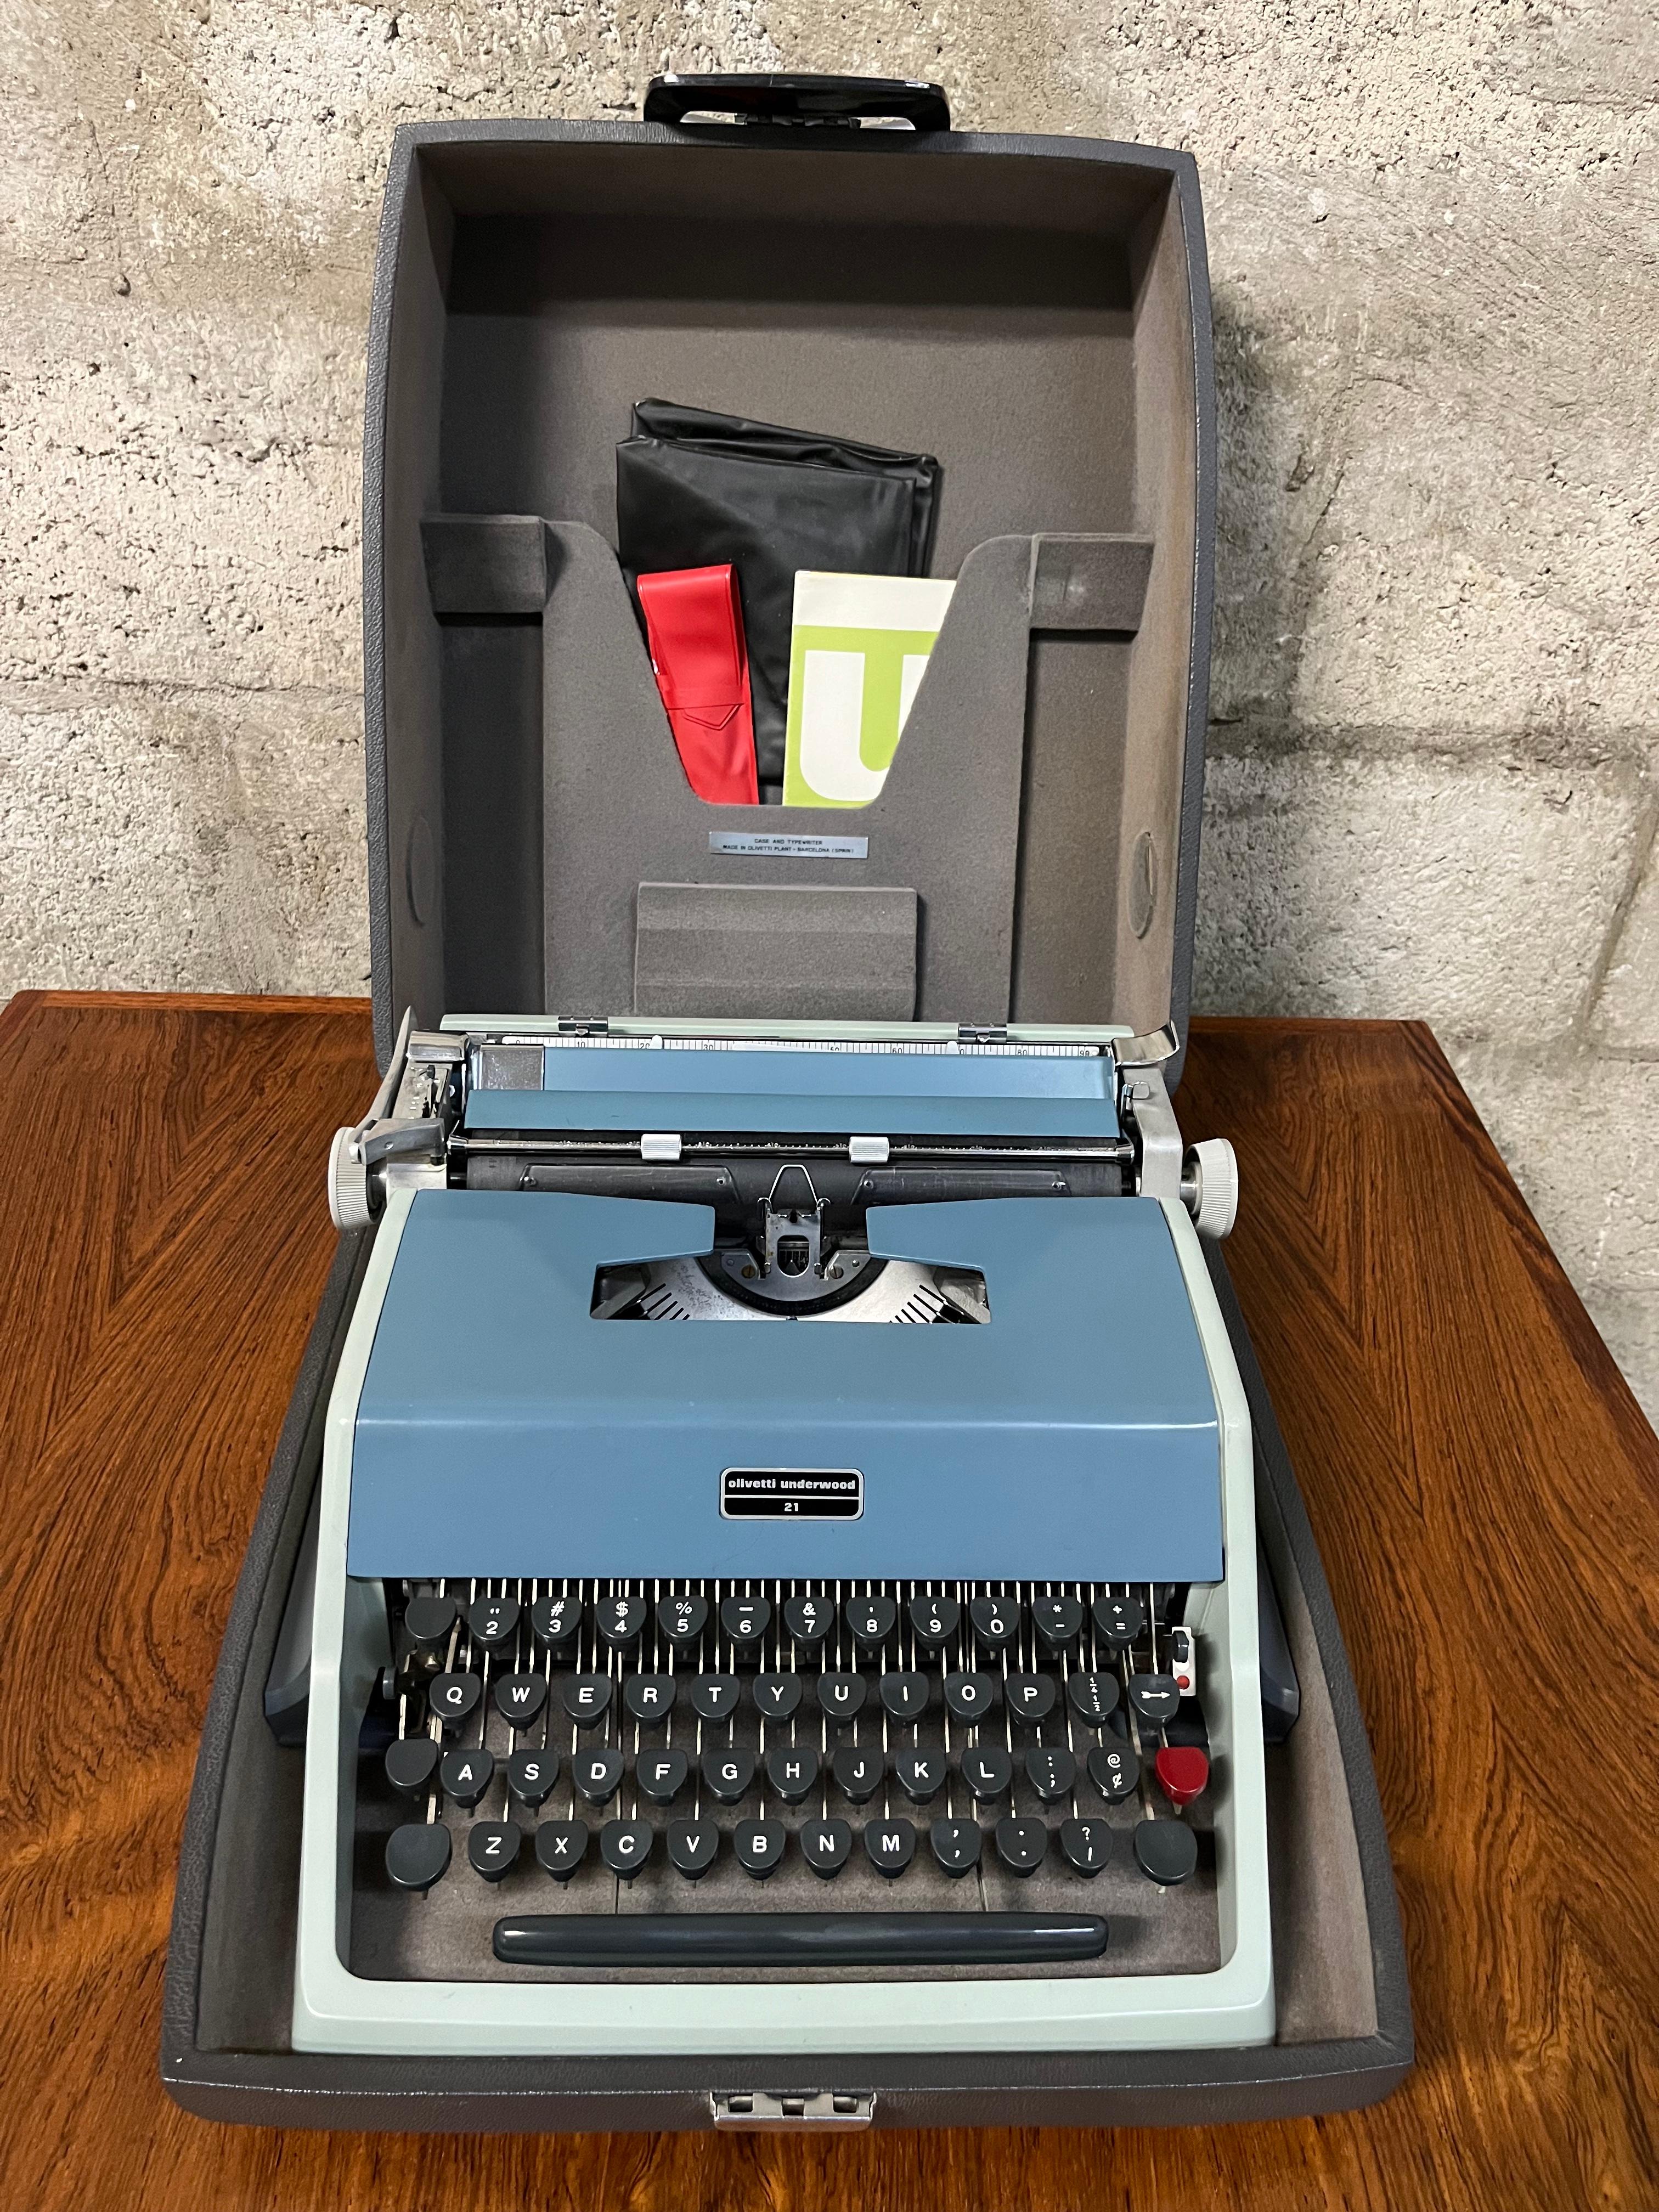 Vintage Mid Century Modern Olivetti Underwood 21 Portable Typewriter With Original Case Circa 1960s 
Features a QUERTY keyboard, a teal and light blue metal body with a dark gray plastic portable case.
It comes with the original instruction manual